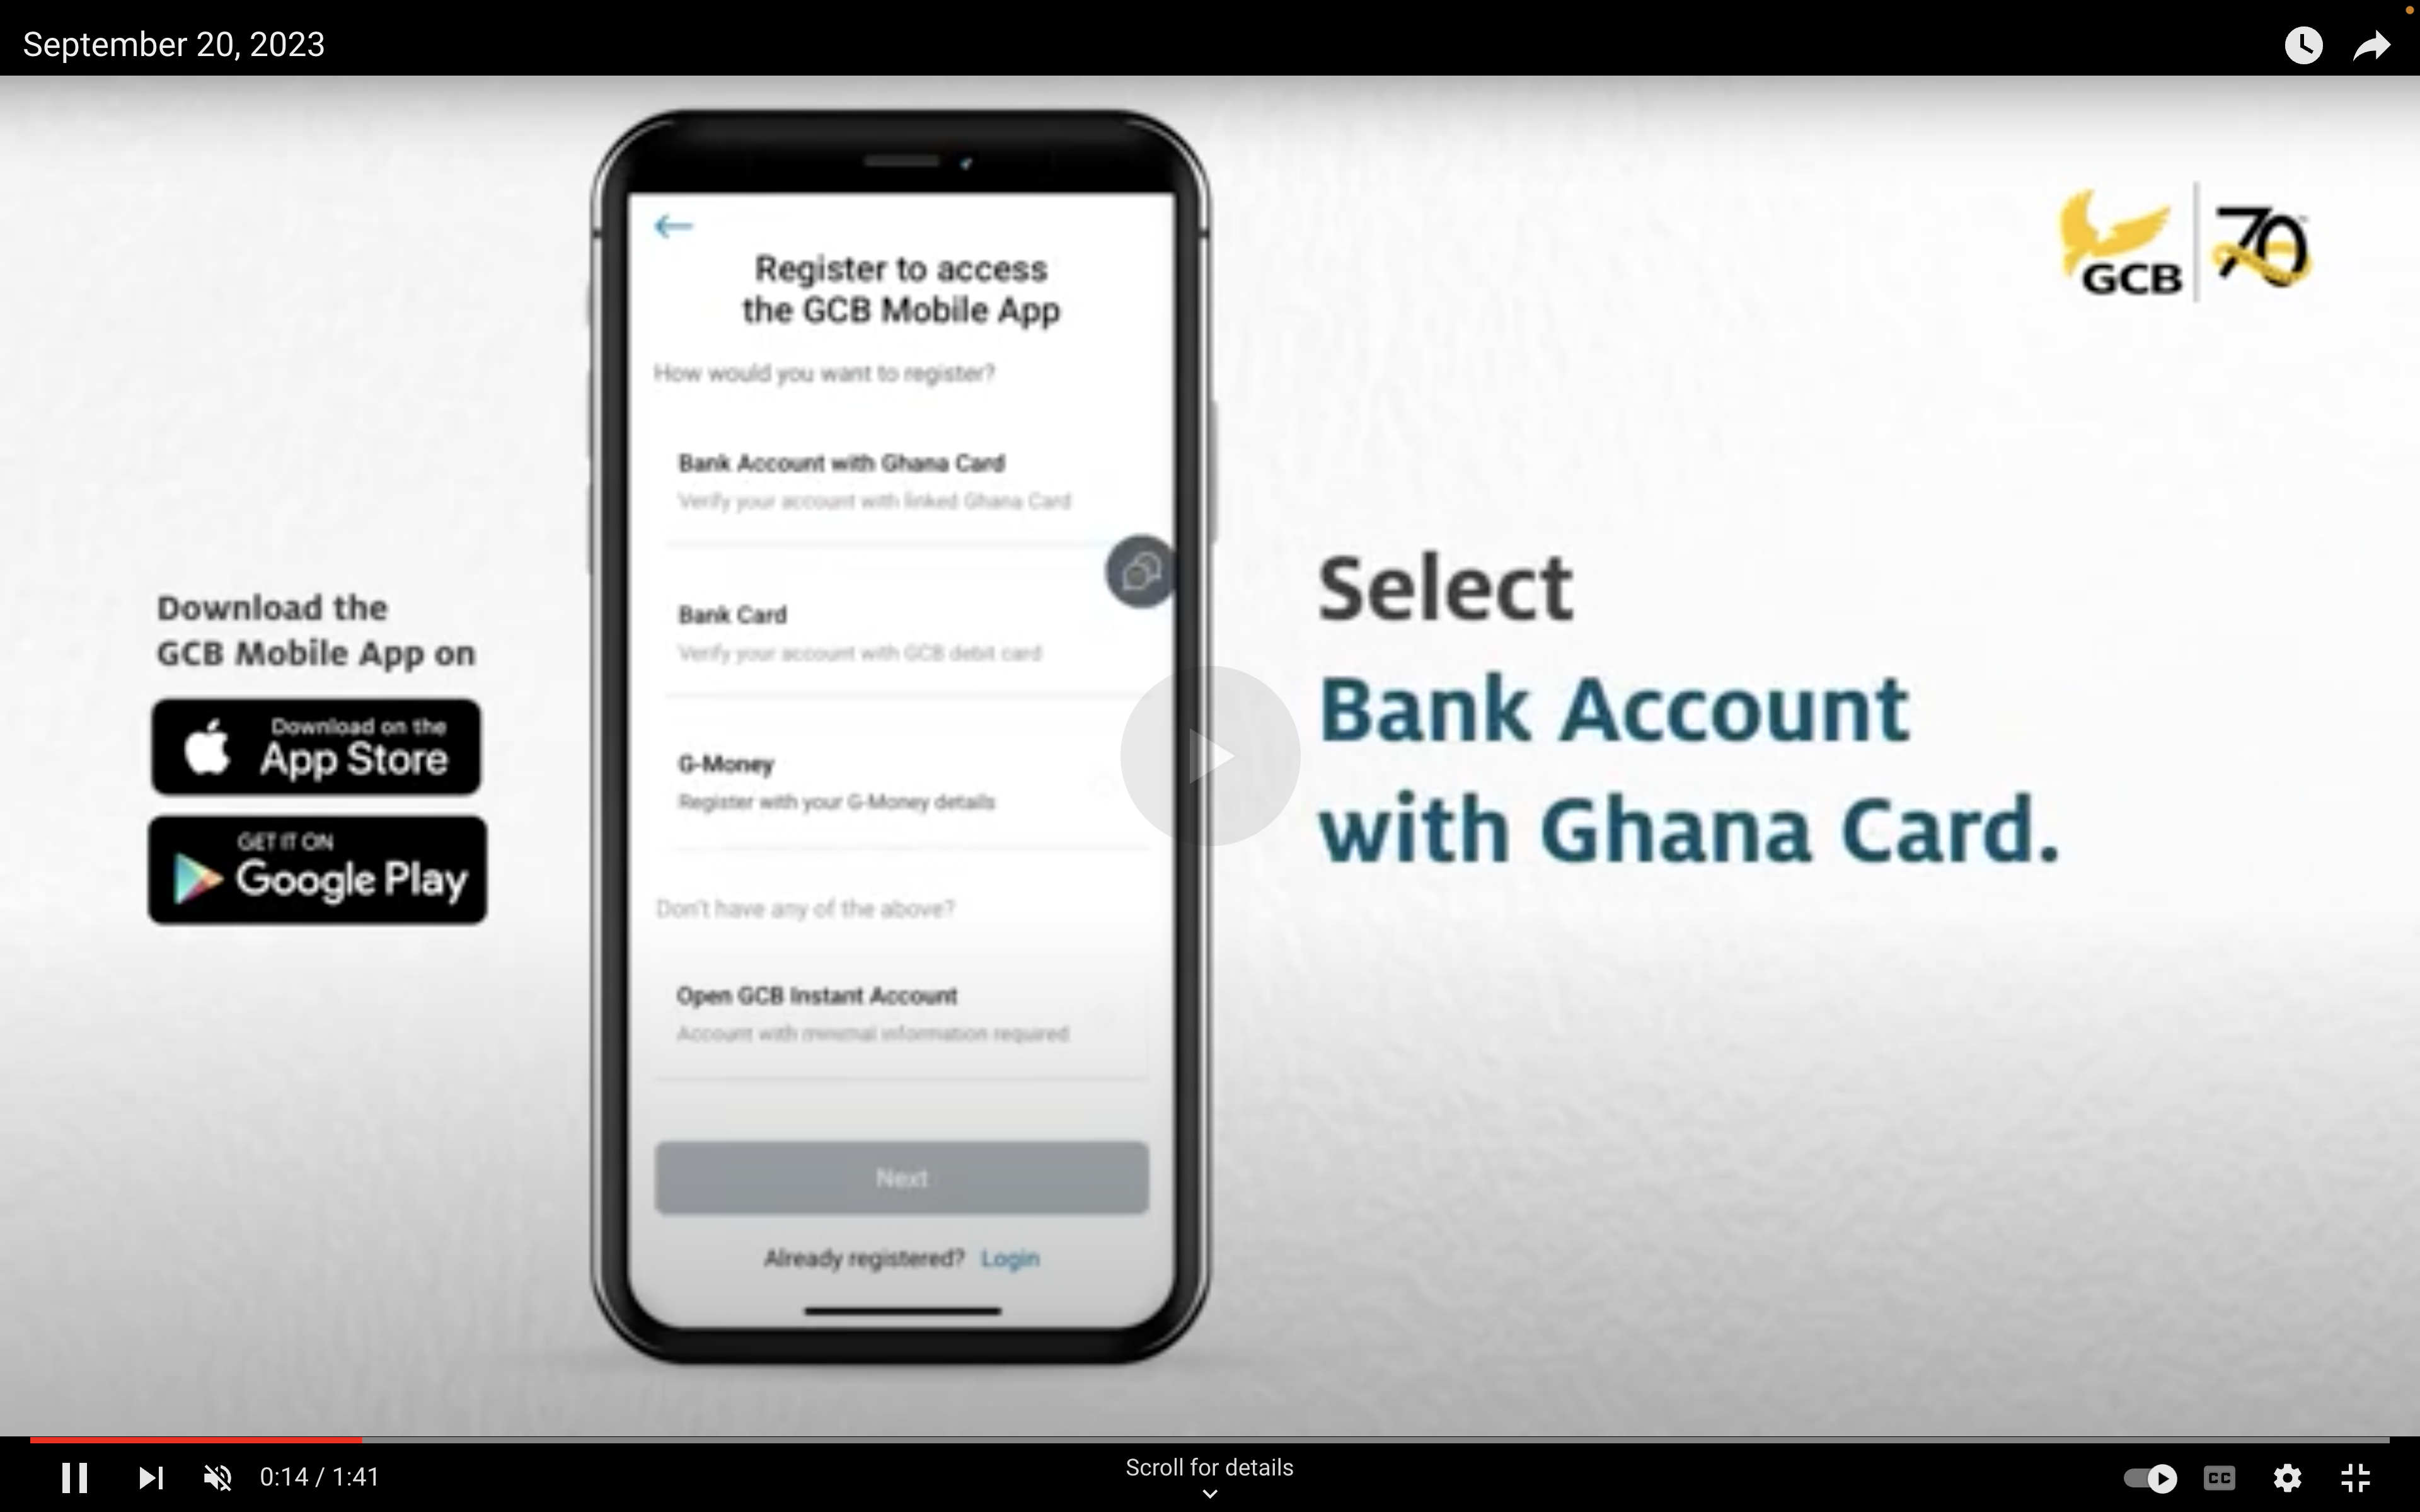 How To Register Using Your Bank Account and Ghana Card